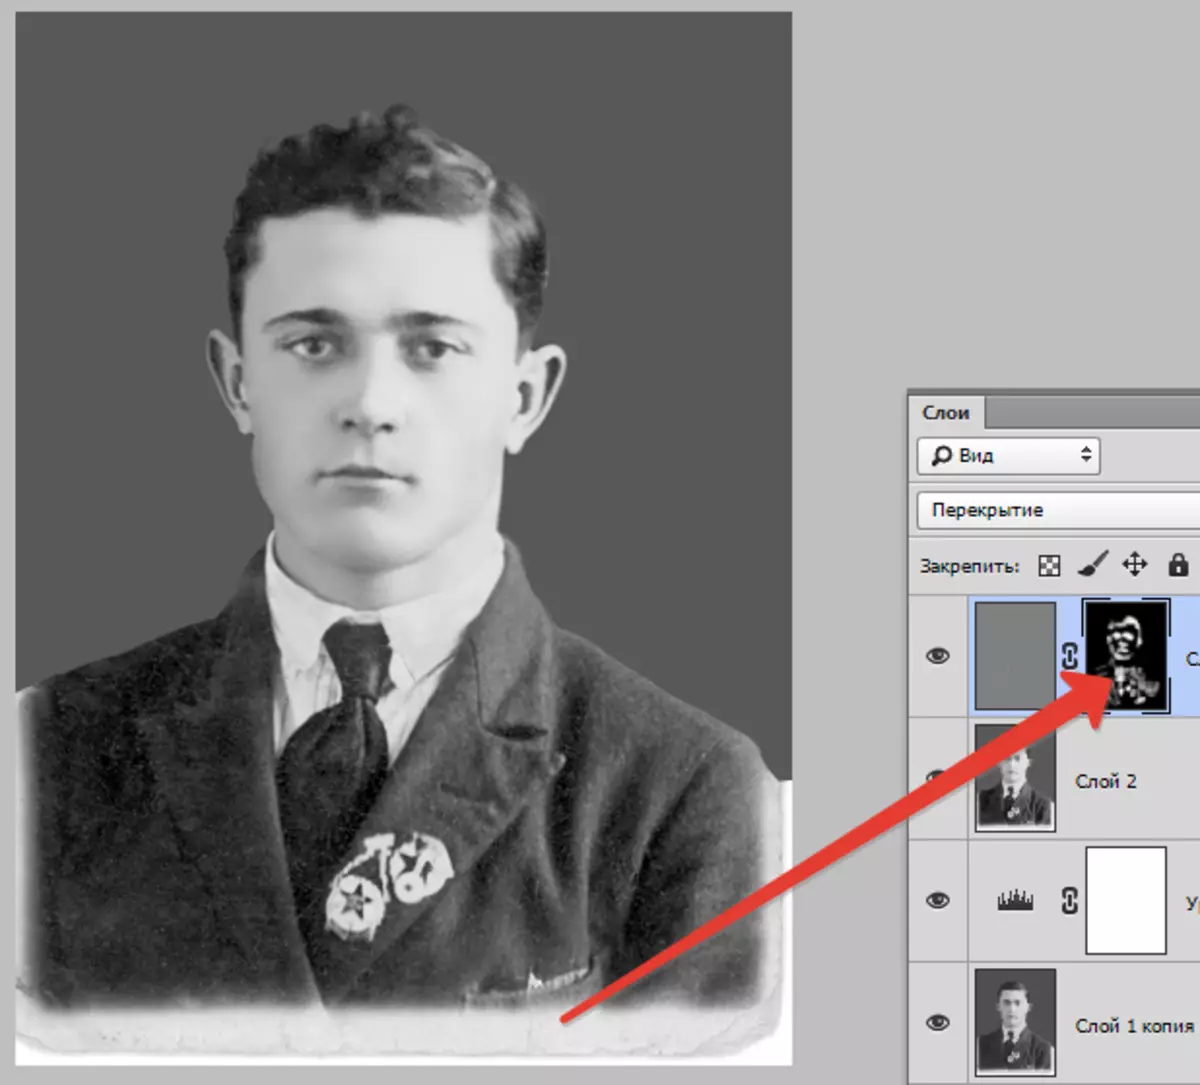 Restore the old photo in Photoshop